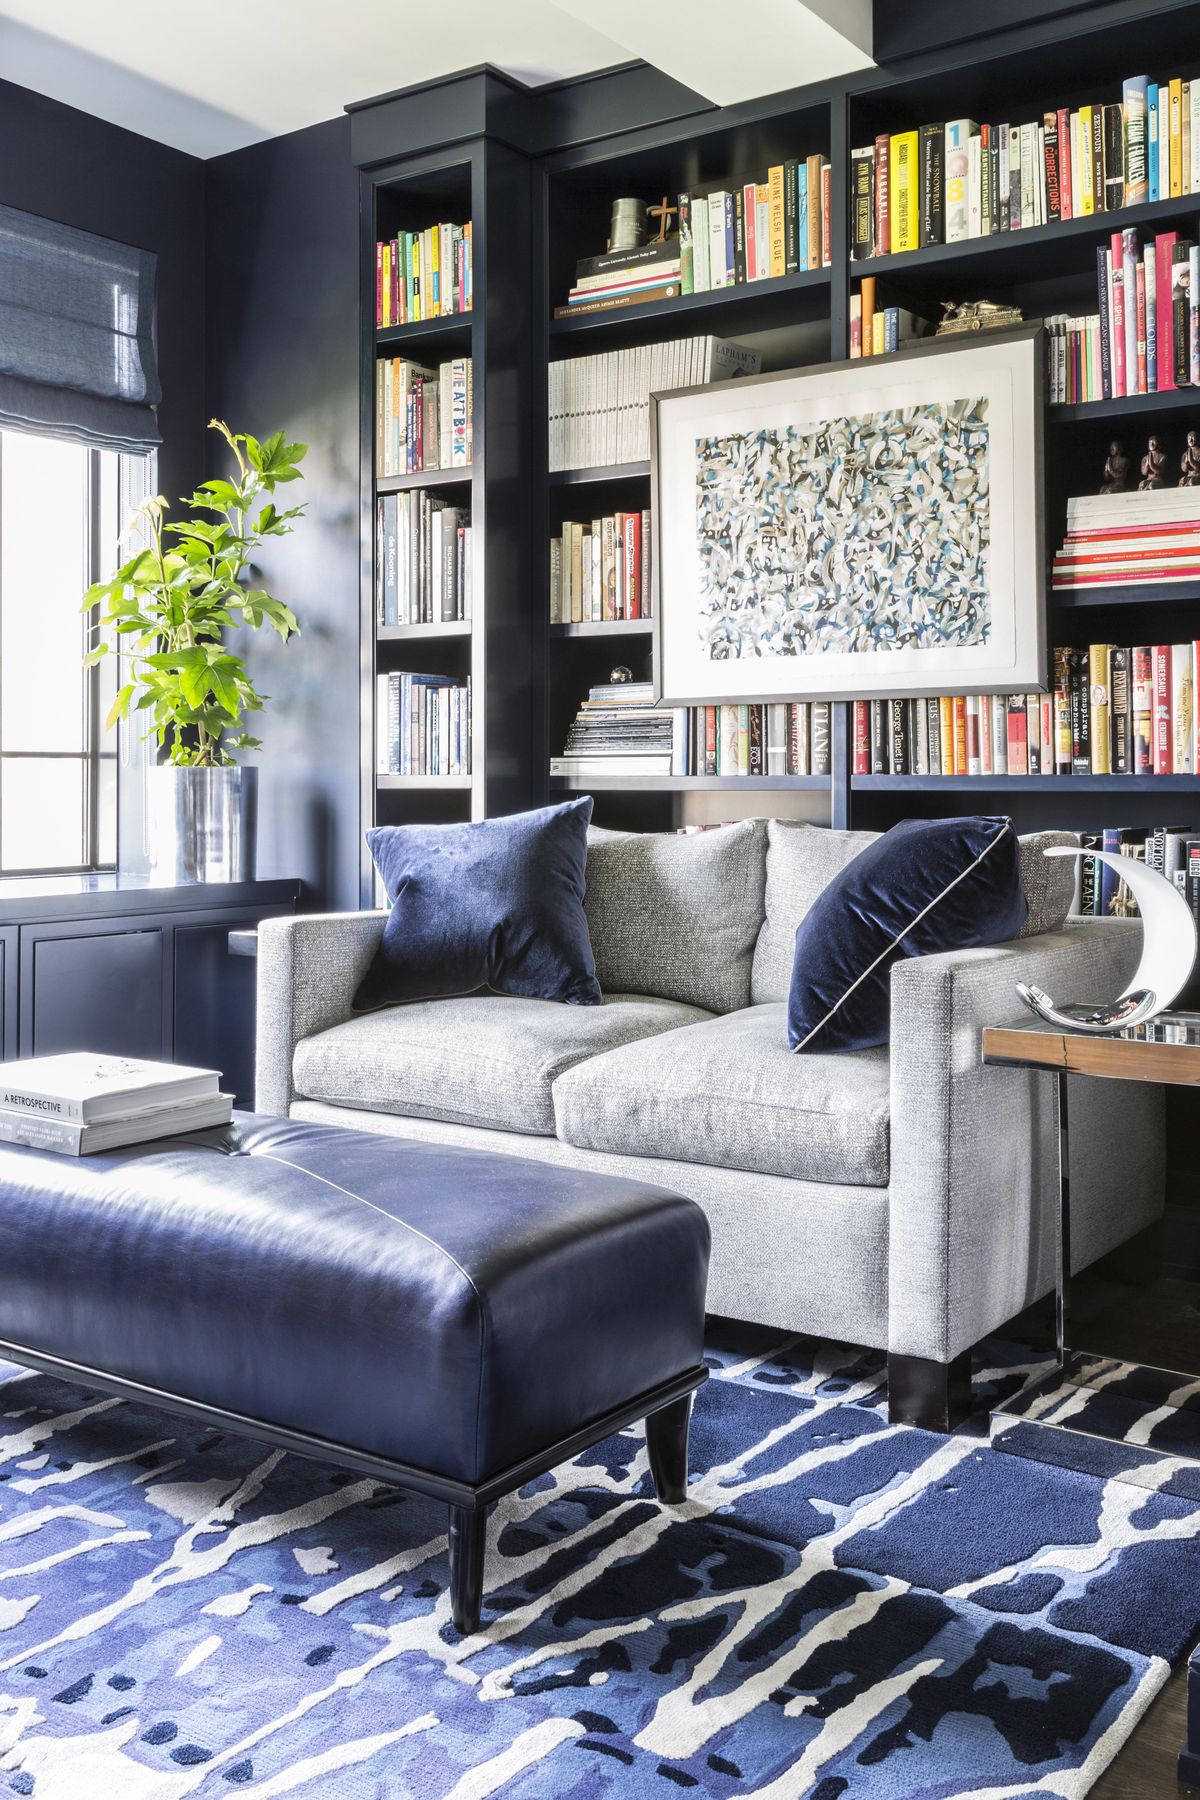 Designer Jamie Drake says “This cozy library with dramatic navy walls is energized in a distinct and artful way by the dynamic carpet underneath it also perfectly pulls together the room’s details.” (Marco Ricca / Drake/Anderson)